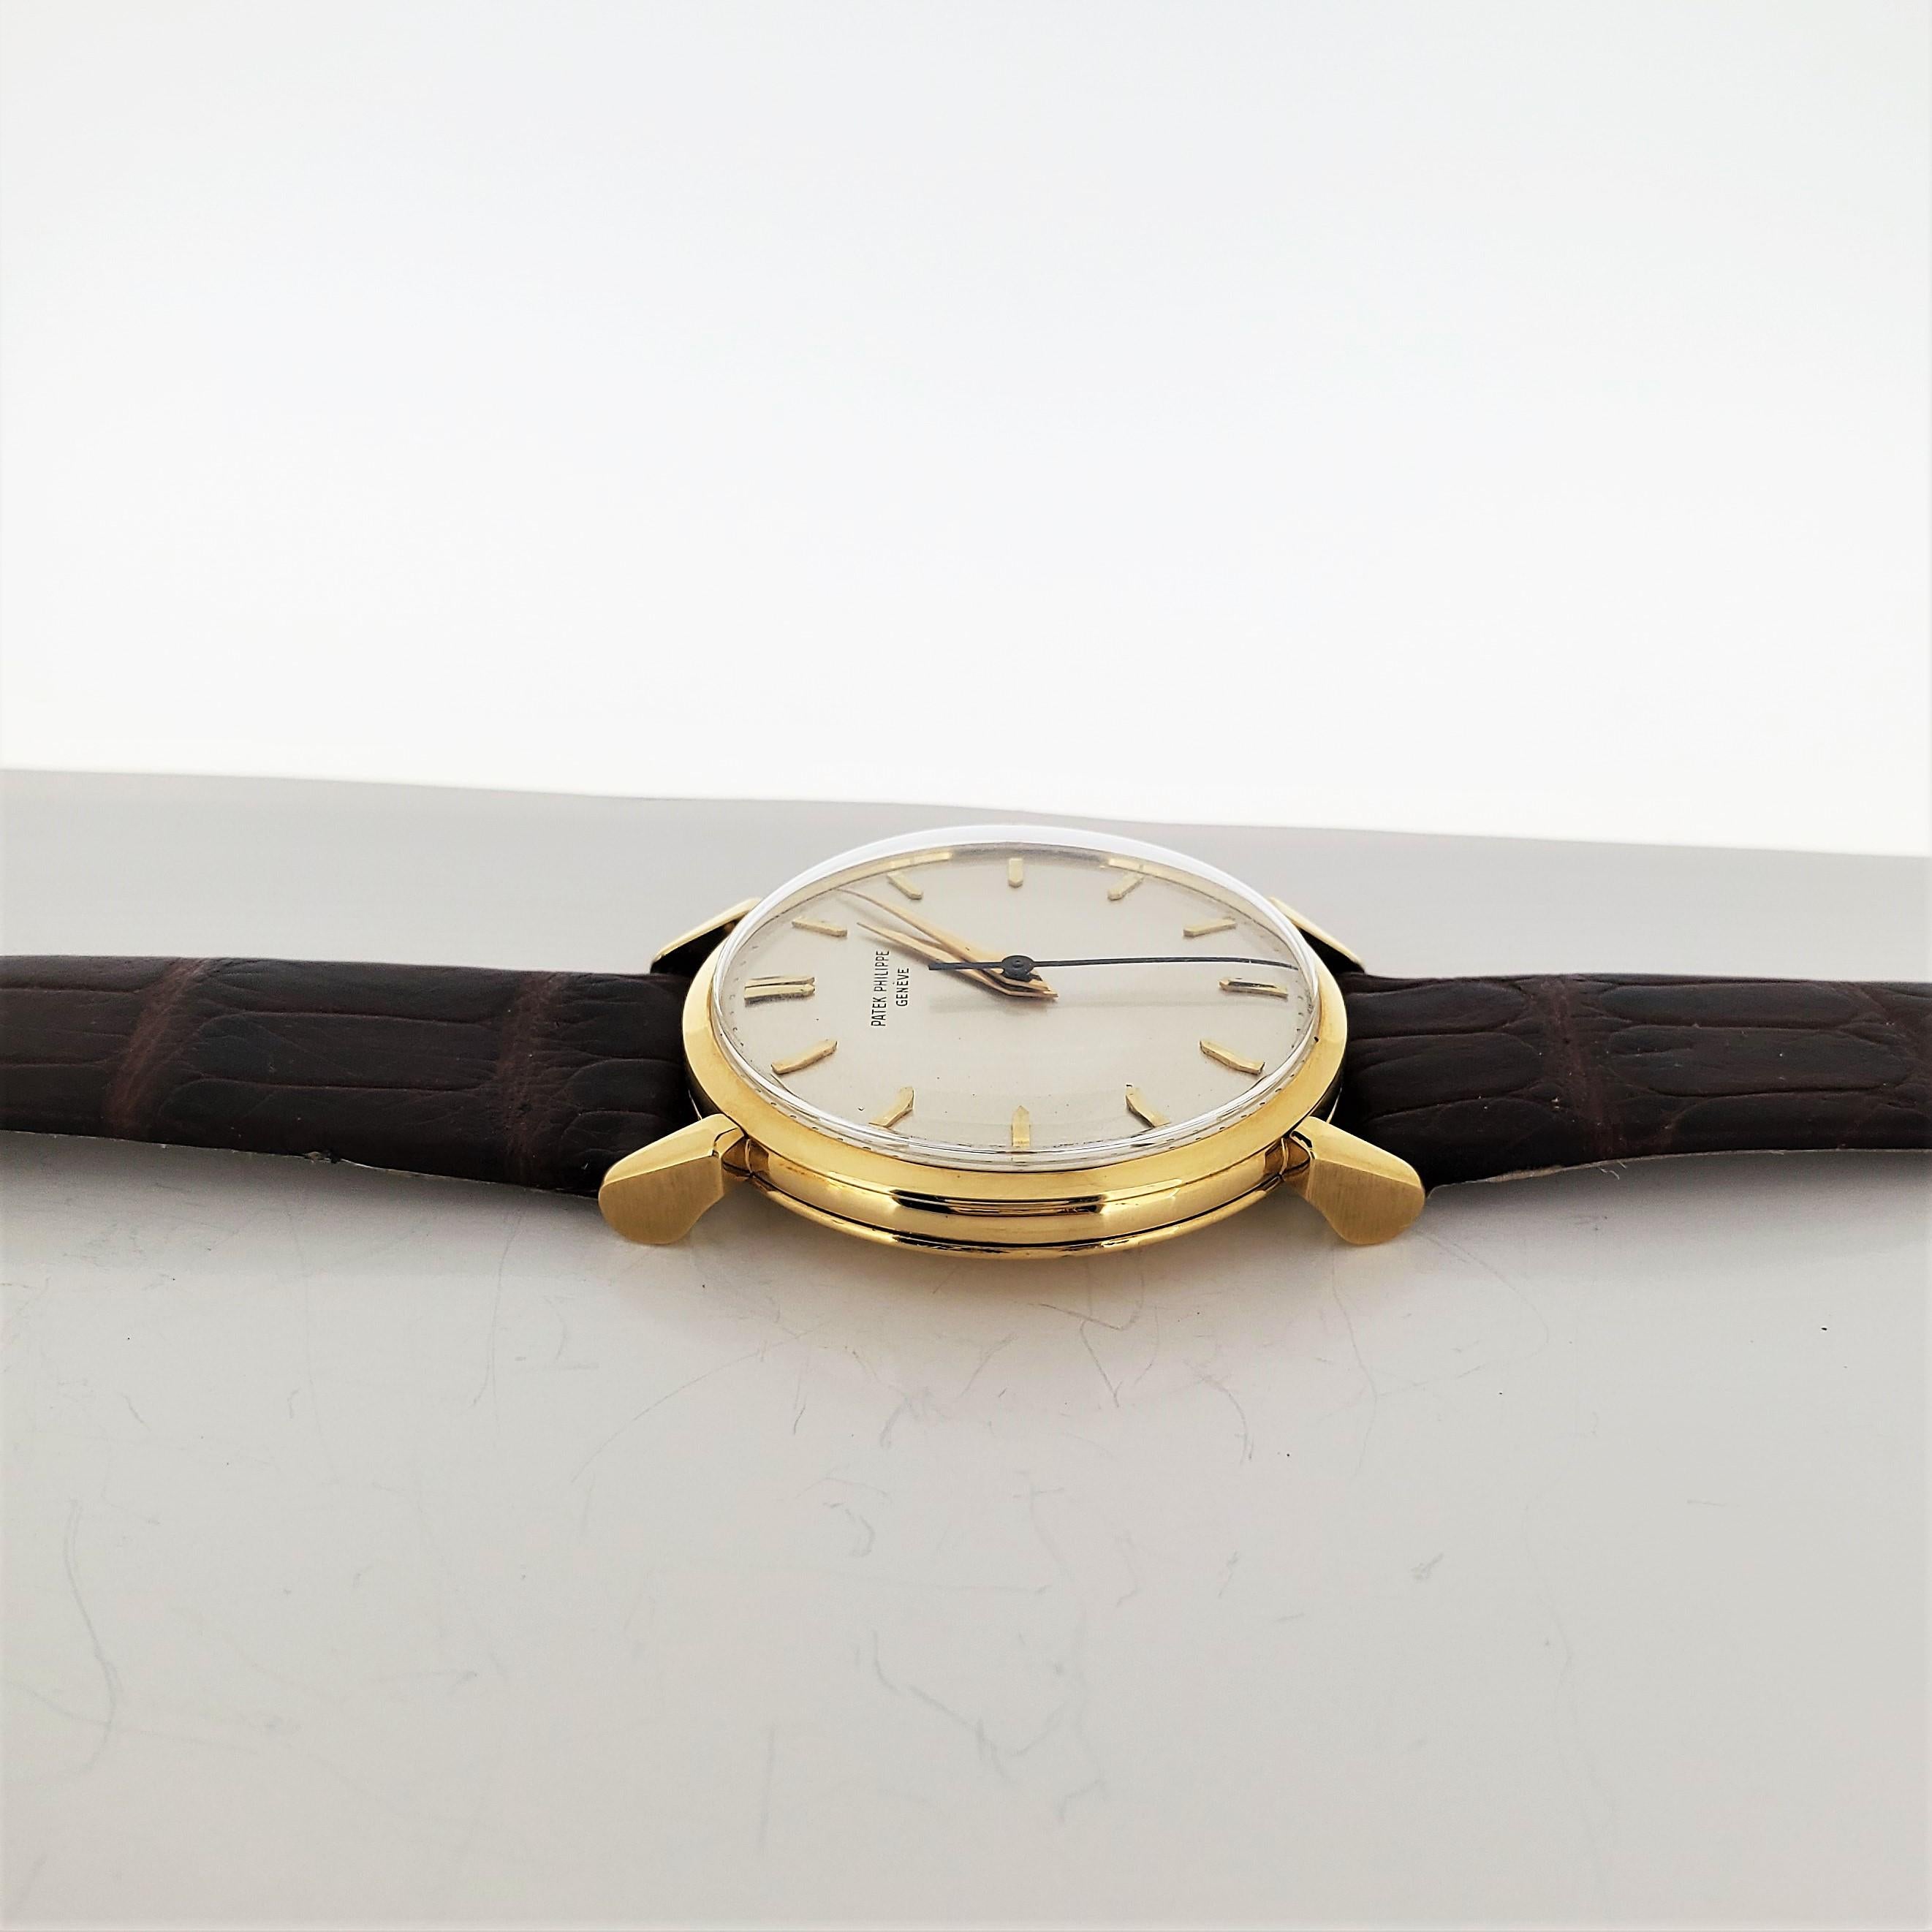 patek philippe watch for sale